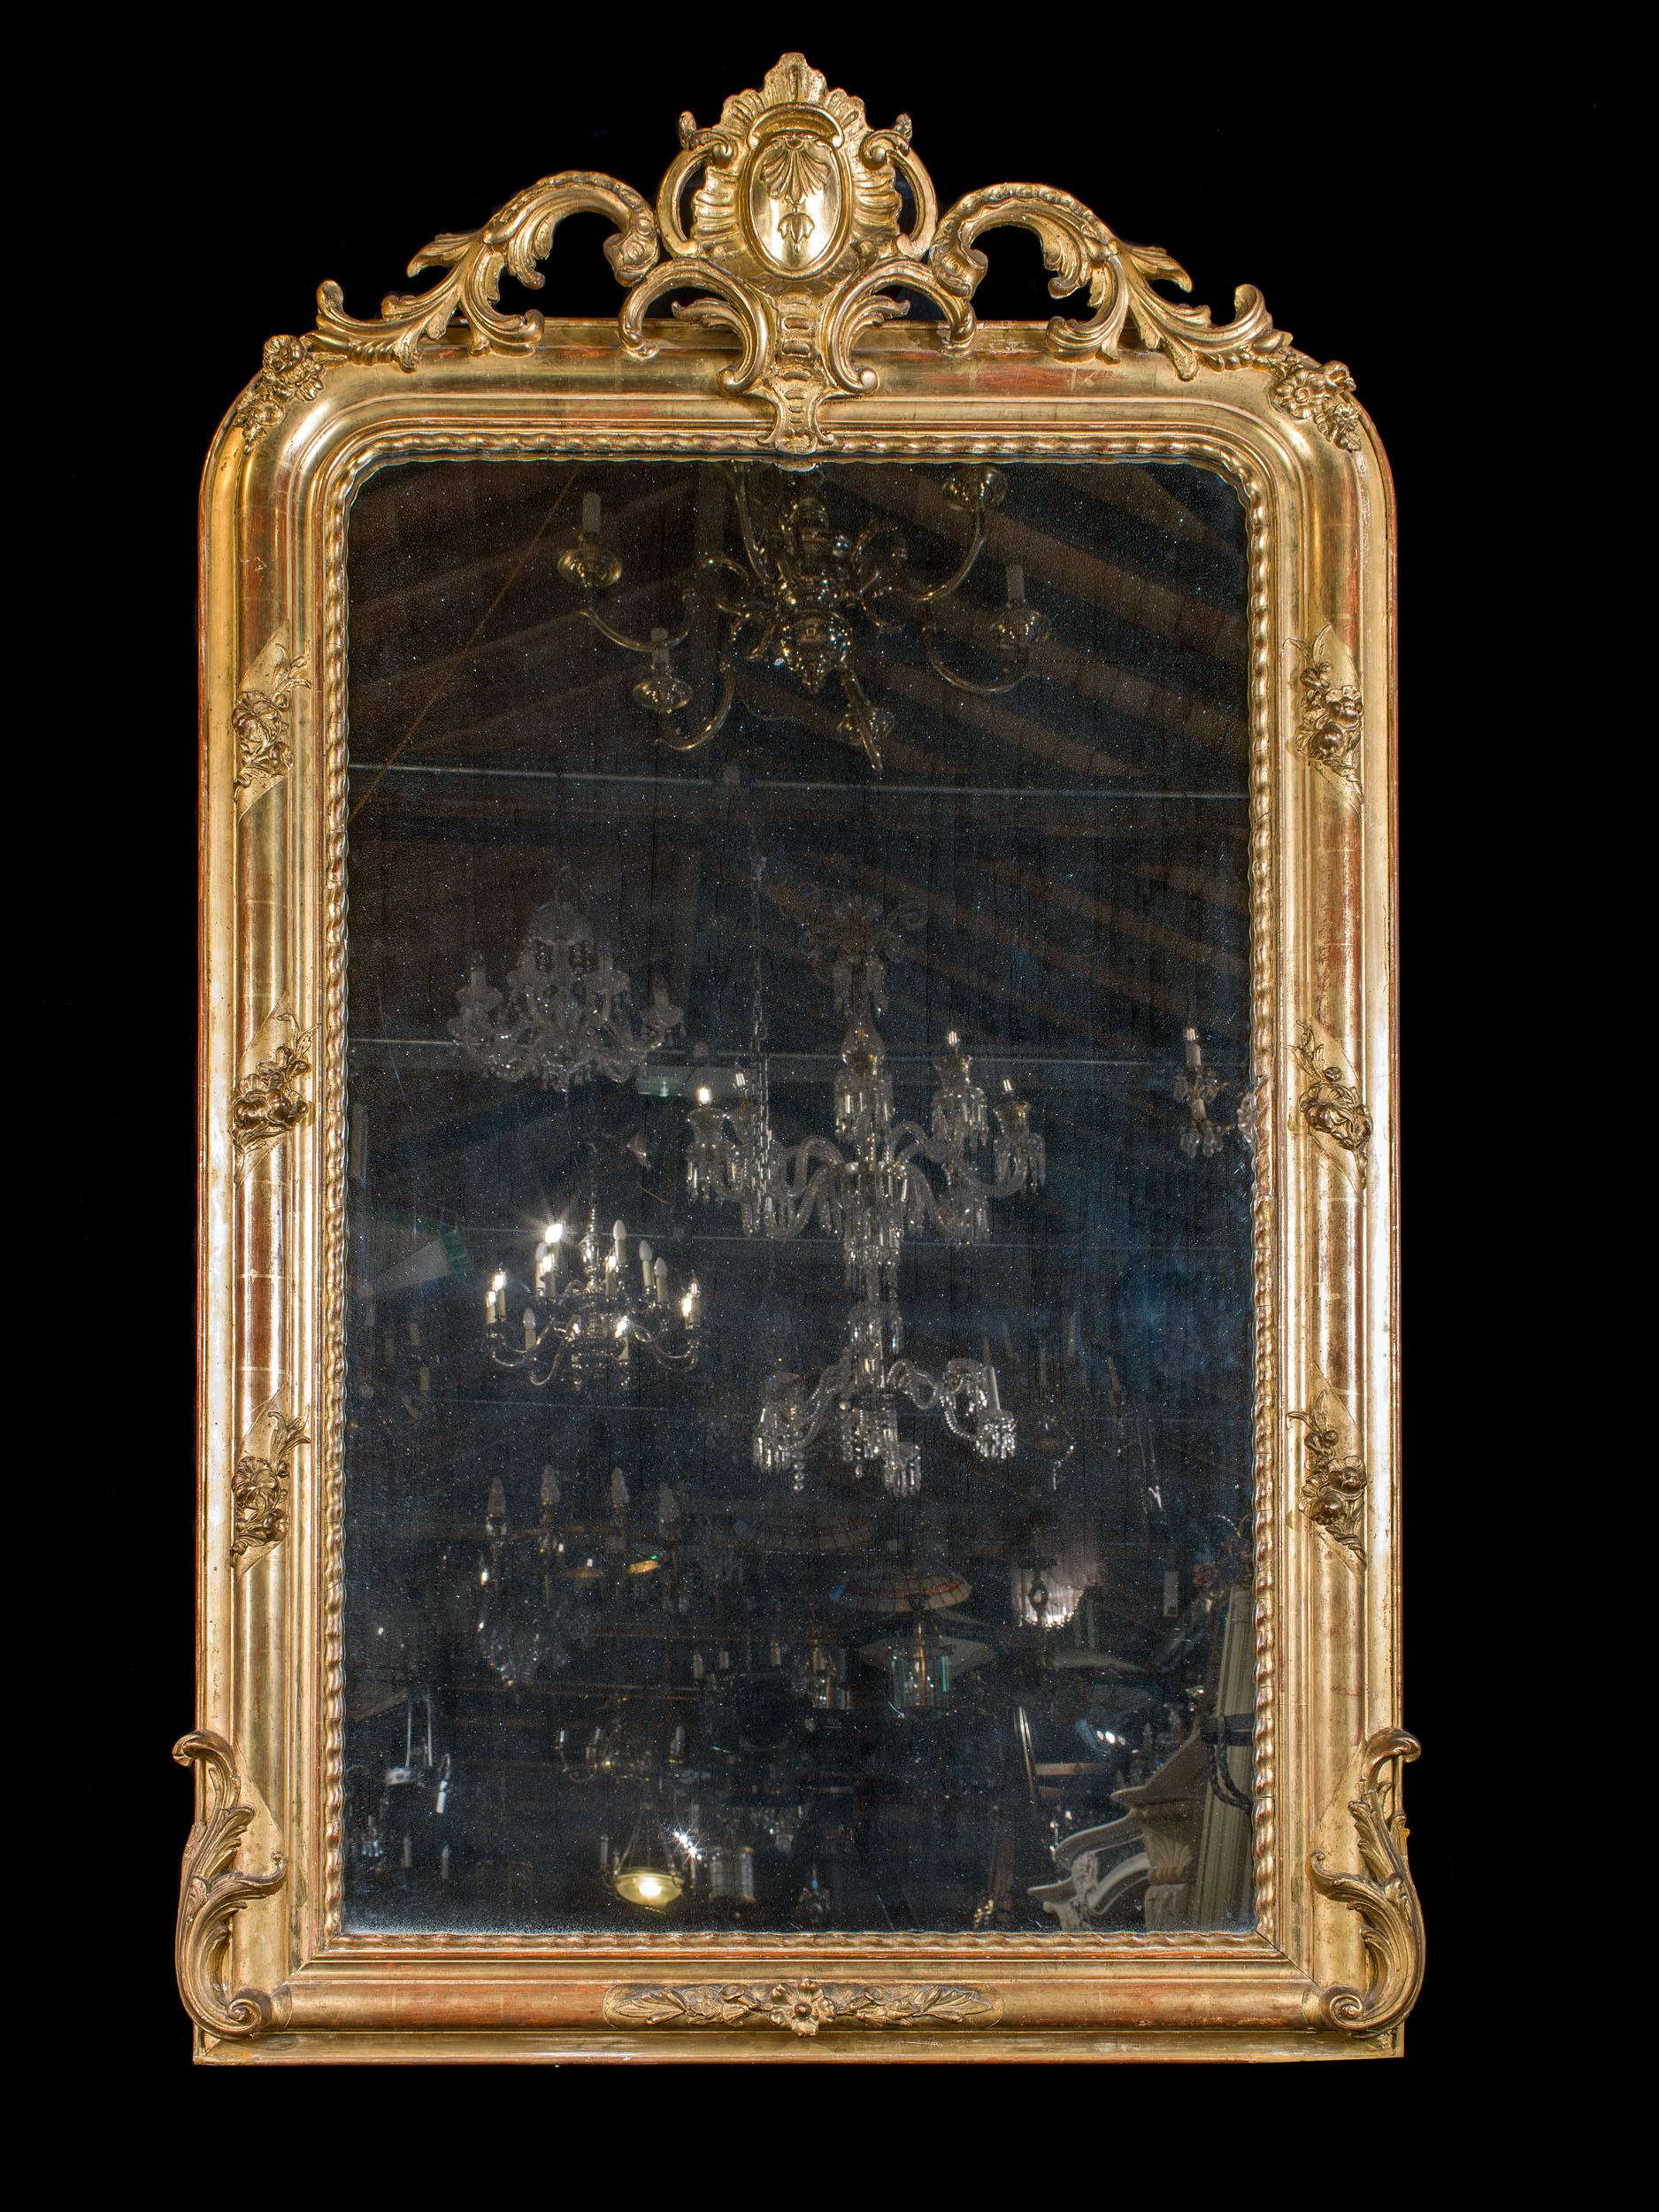 An elegant French 19th century giltwood overmantel mirror in the Louis Philippe style, surmounted by a cartouche of rocaille design mounted above rounded corners. The frame has been beautifully gilded and is embellished by a floral ribbon design